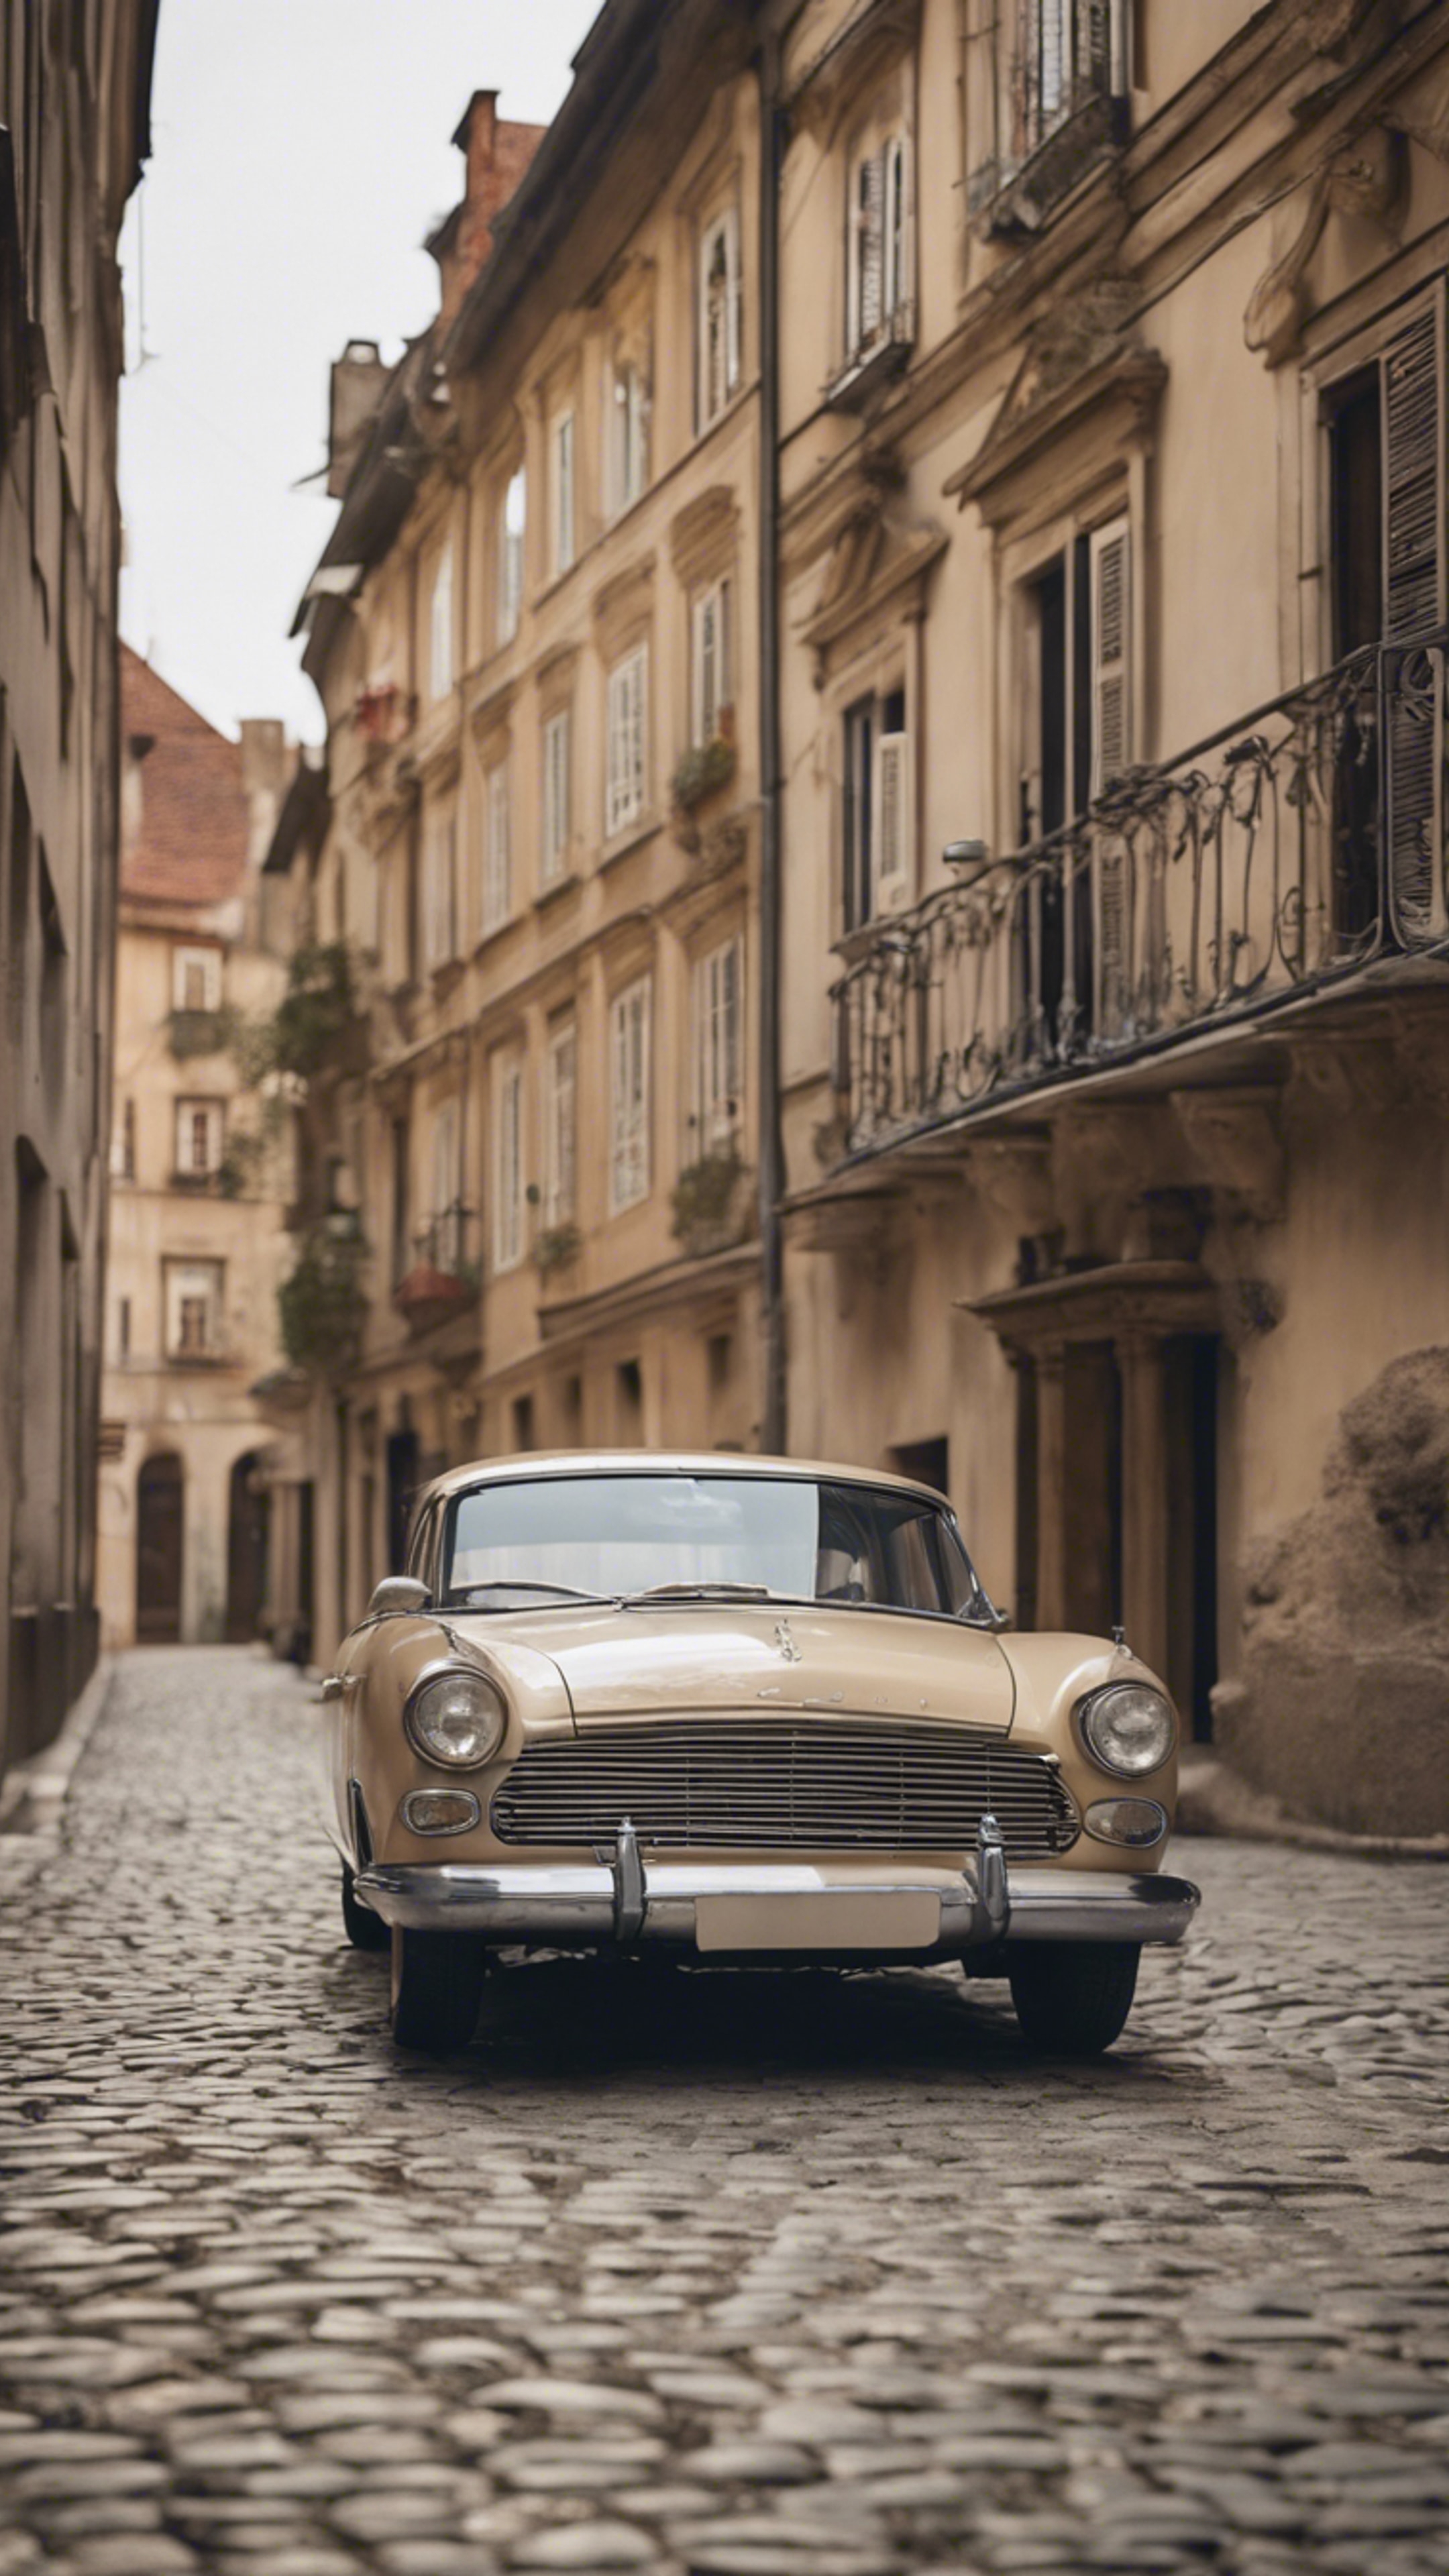 A beige classic car parked on a cobblestone street with rustic buildings in the background. Fond d'écran[31a873a8b96b4be69c6a]